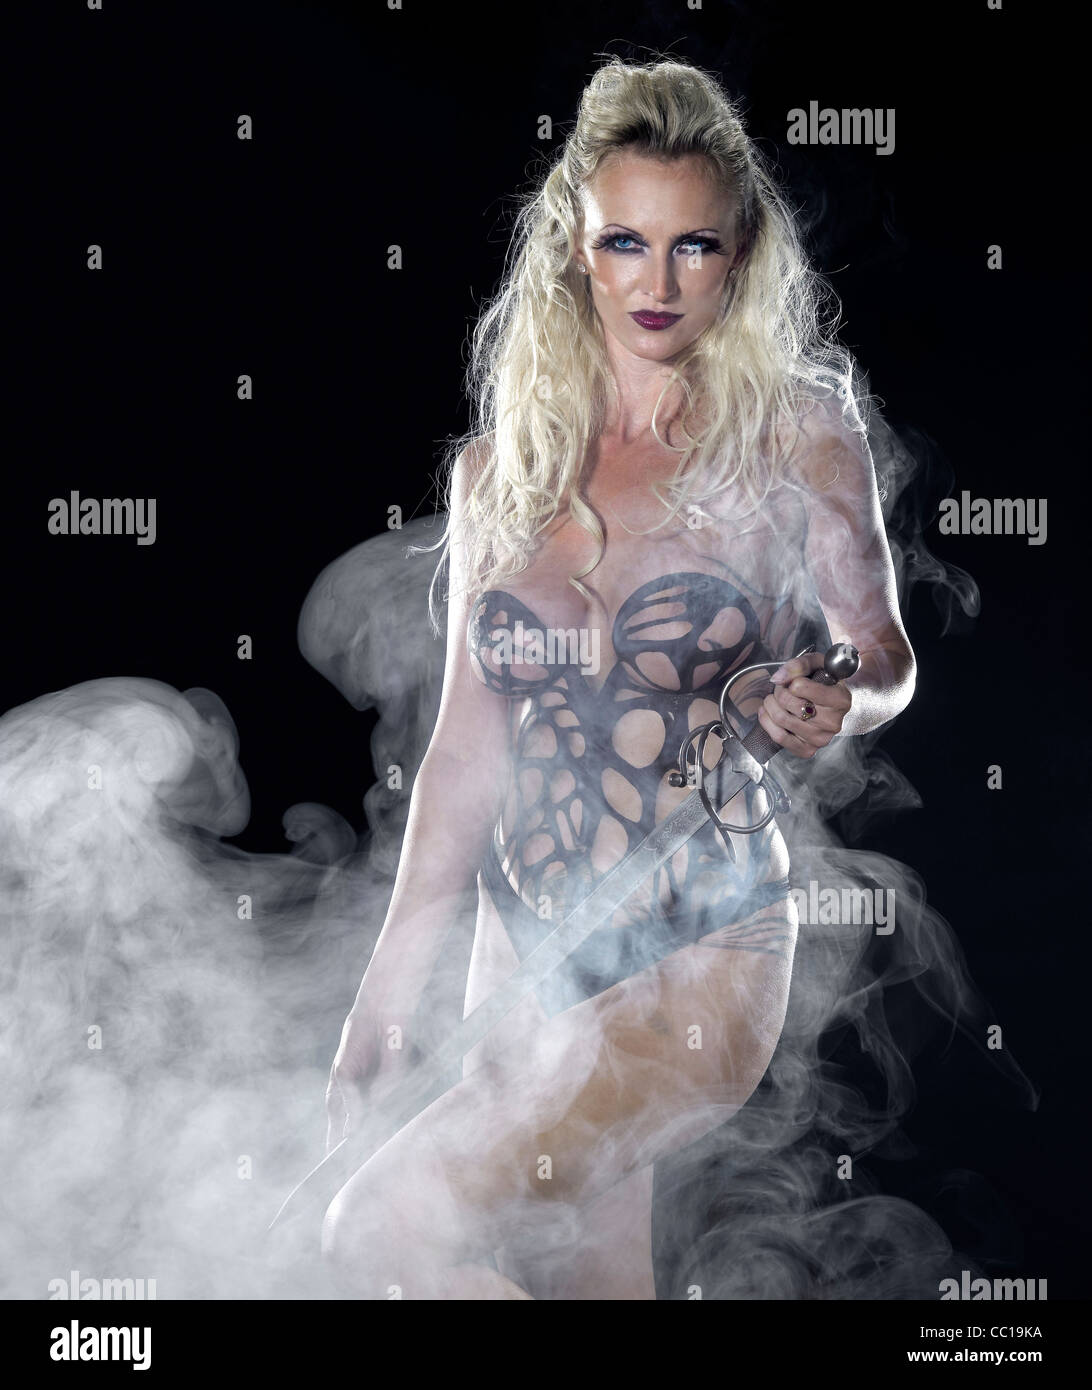 bodypainted blond woman posing in dark back and some fog Stock Photo